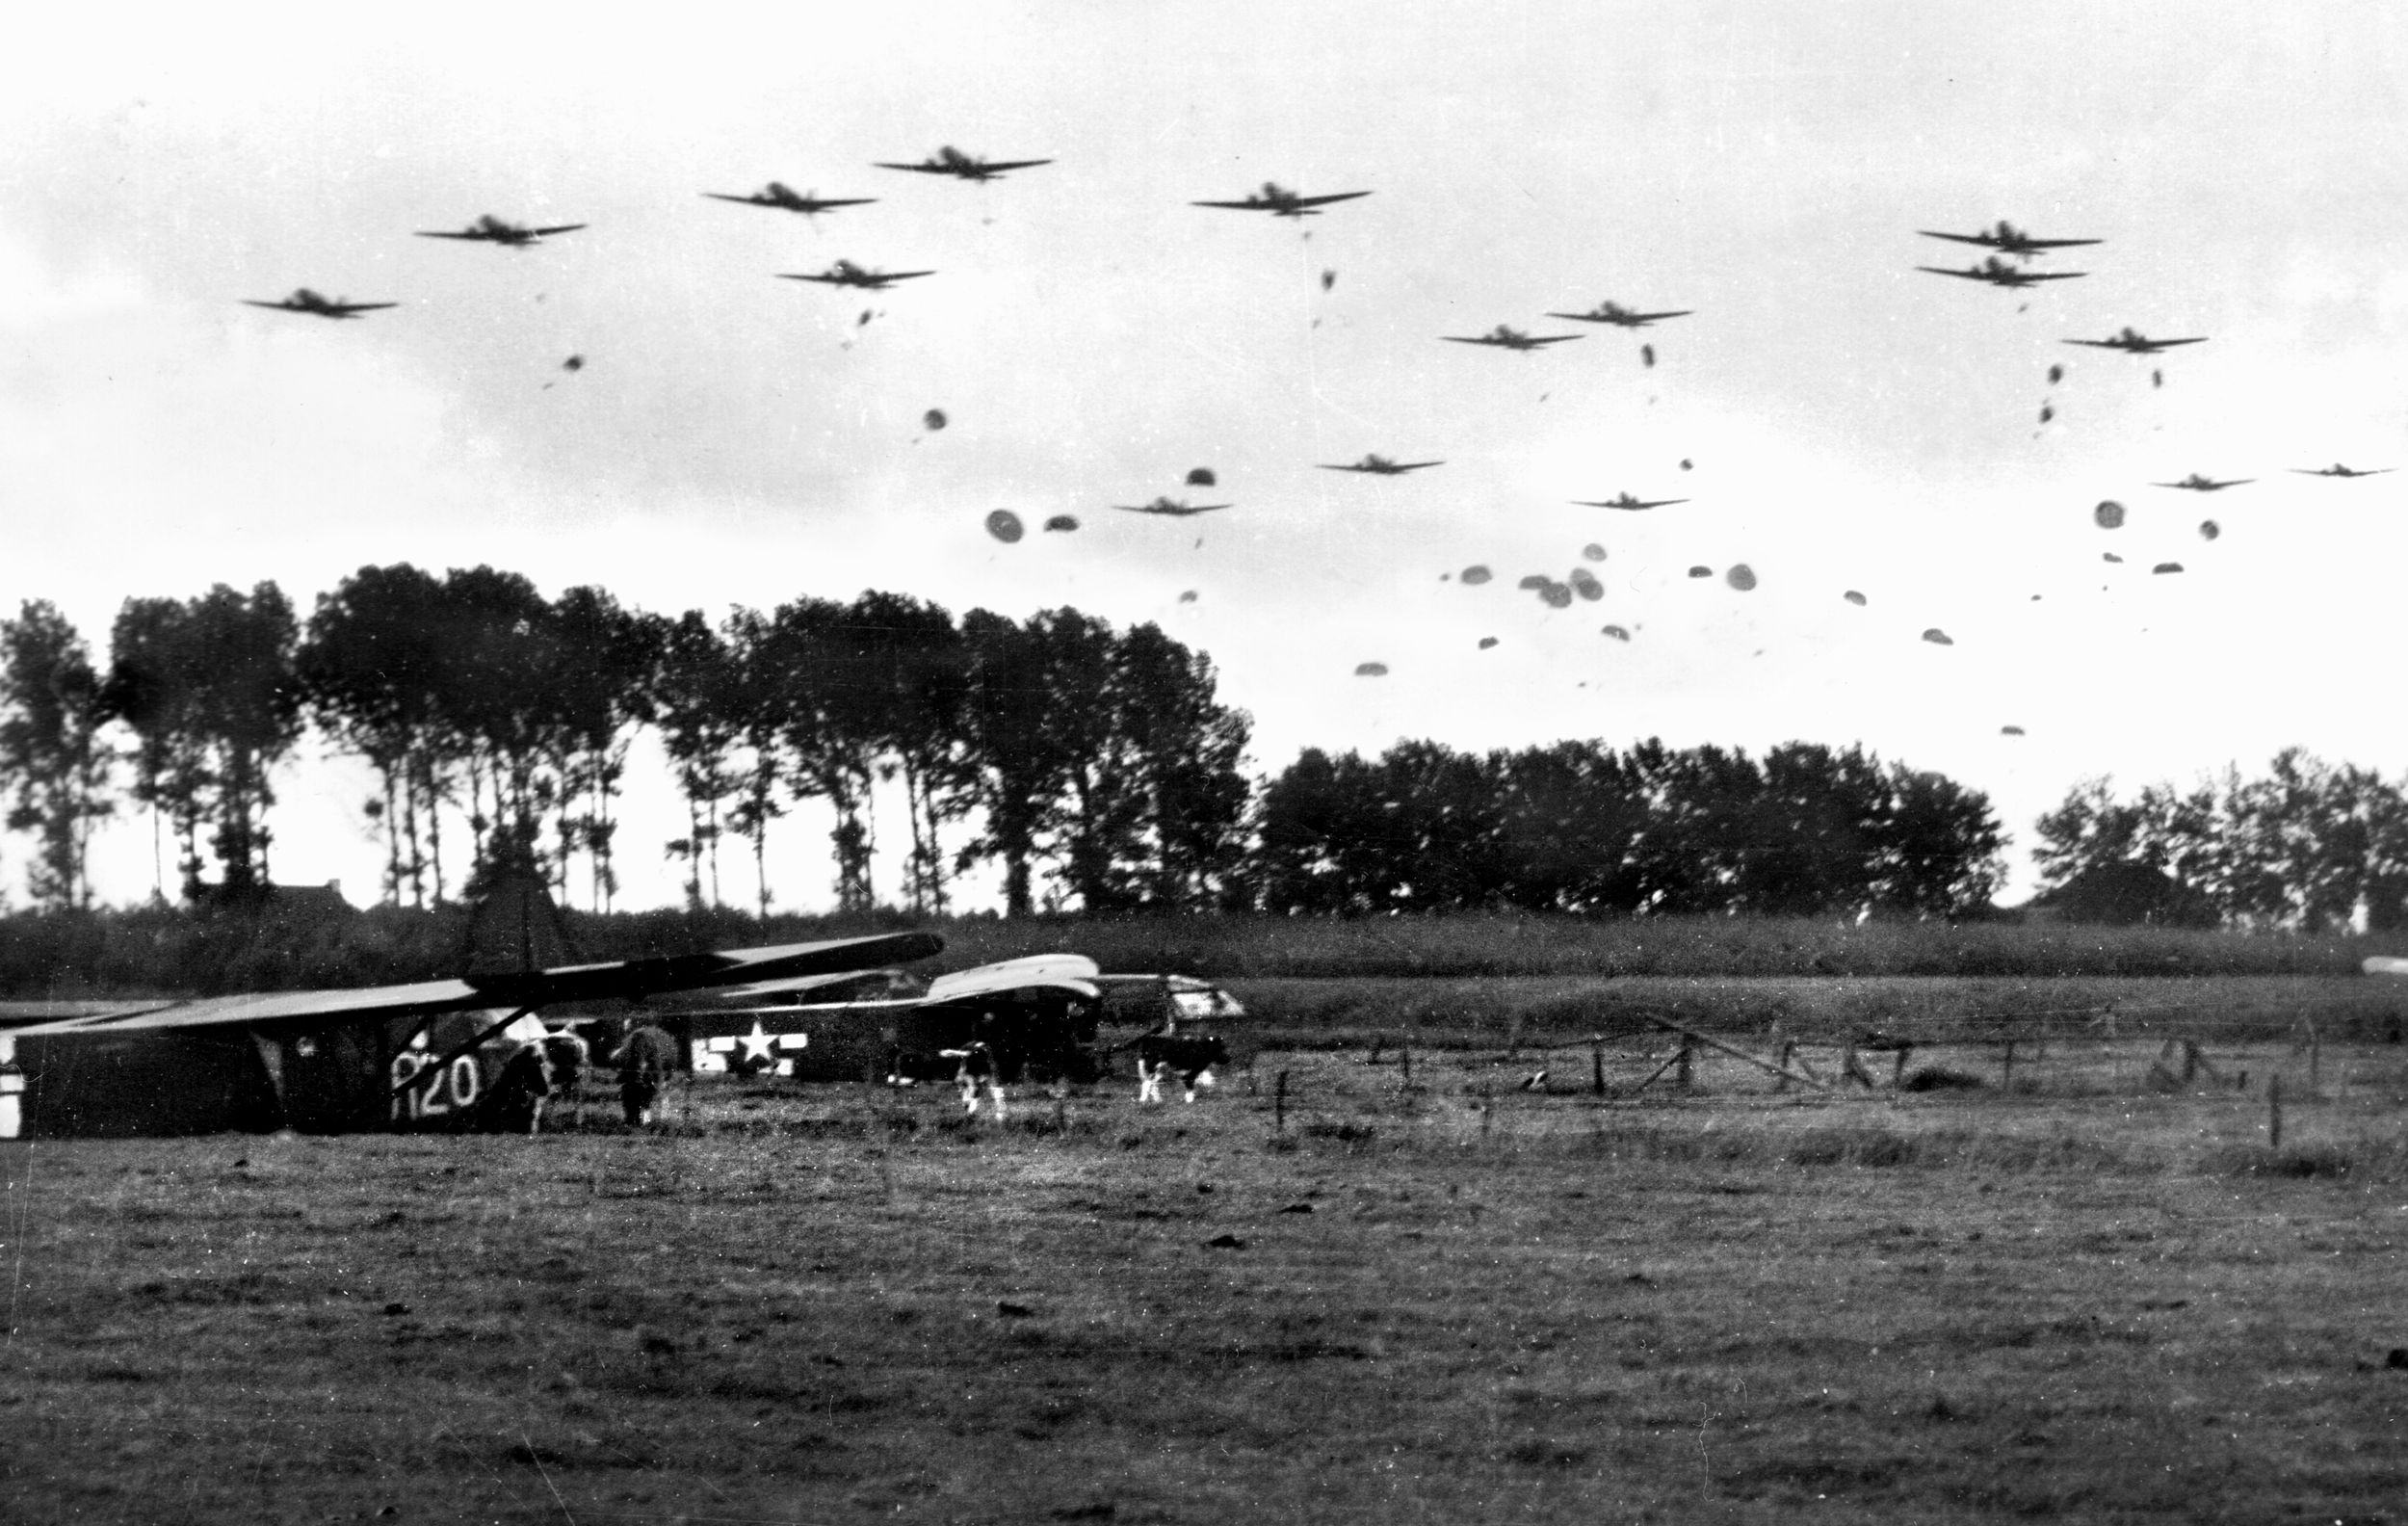 American paratroopers come to earth as Douglas C-47 transport aircraft drone in the skies above. Cows are grazing peacefully in this photo, undisturbed by the early events of Operation Market-Garden.